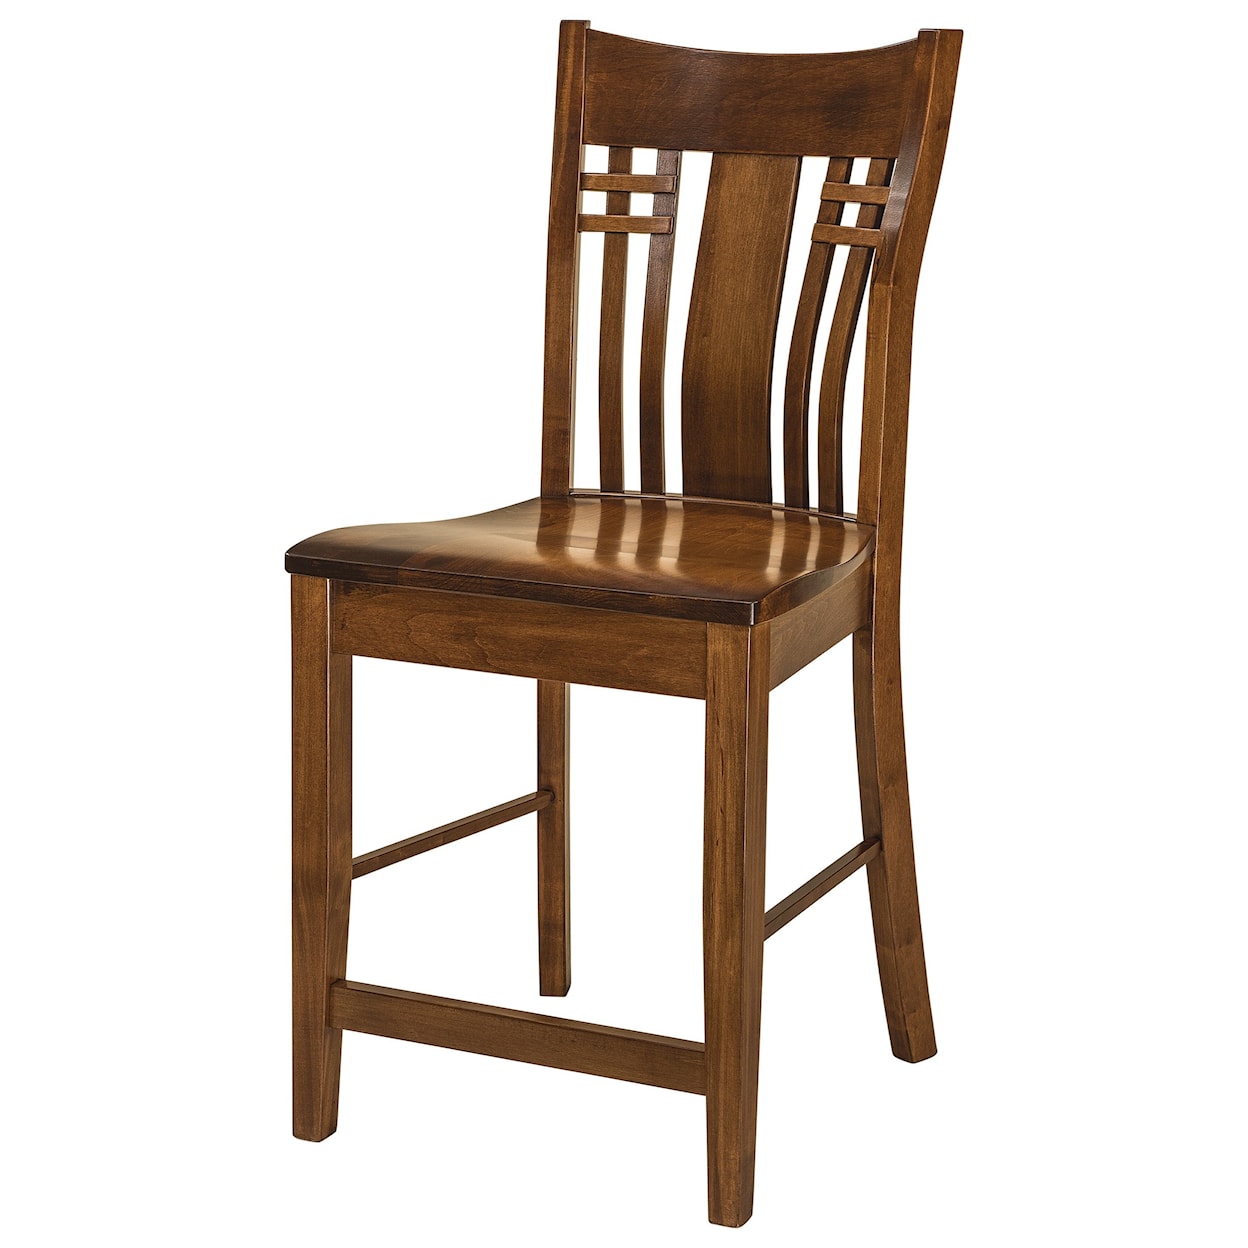 F&N Woodworking Bennet Stationary Bar Stool - Fabric Seat